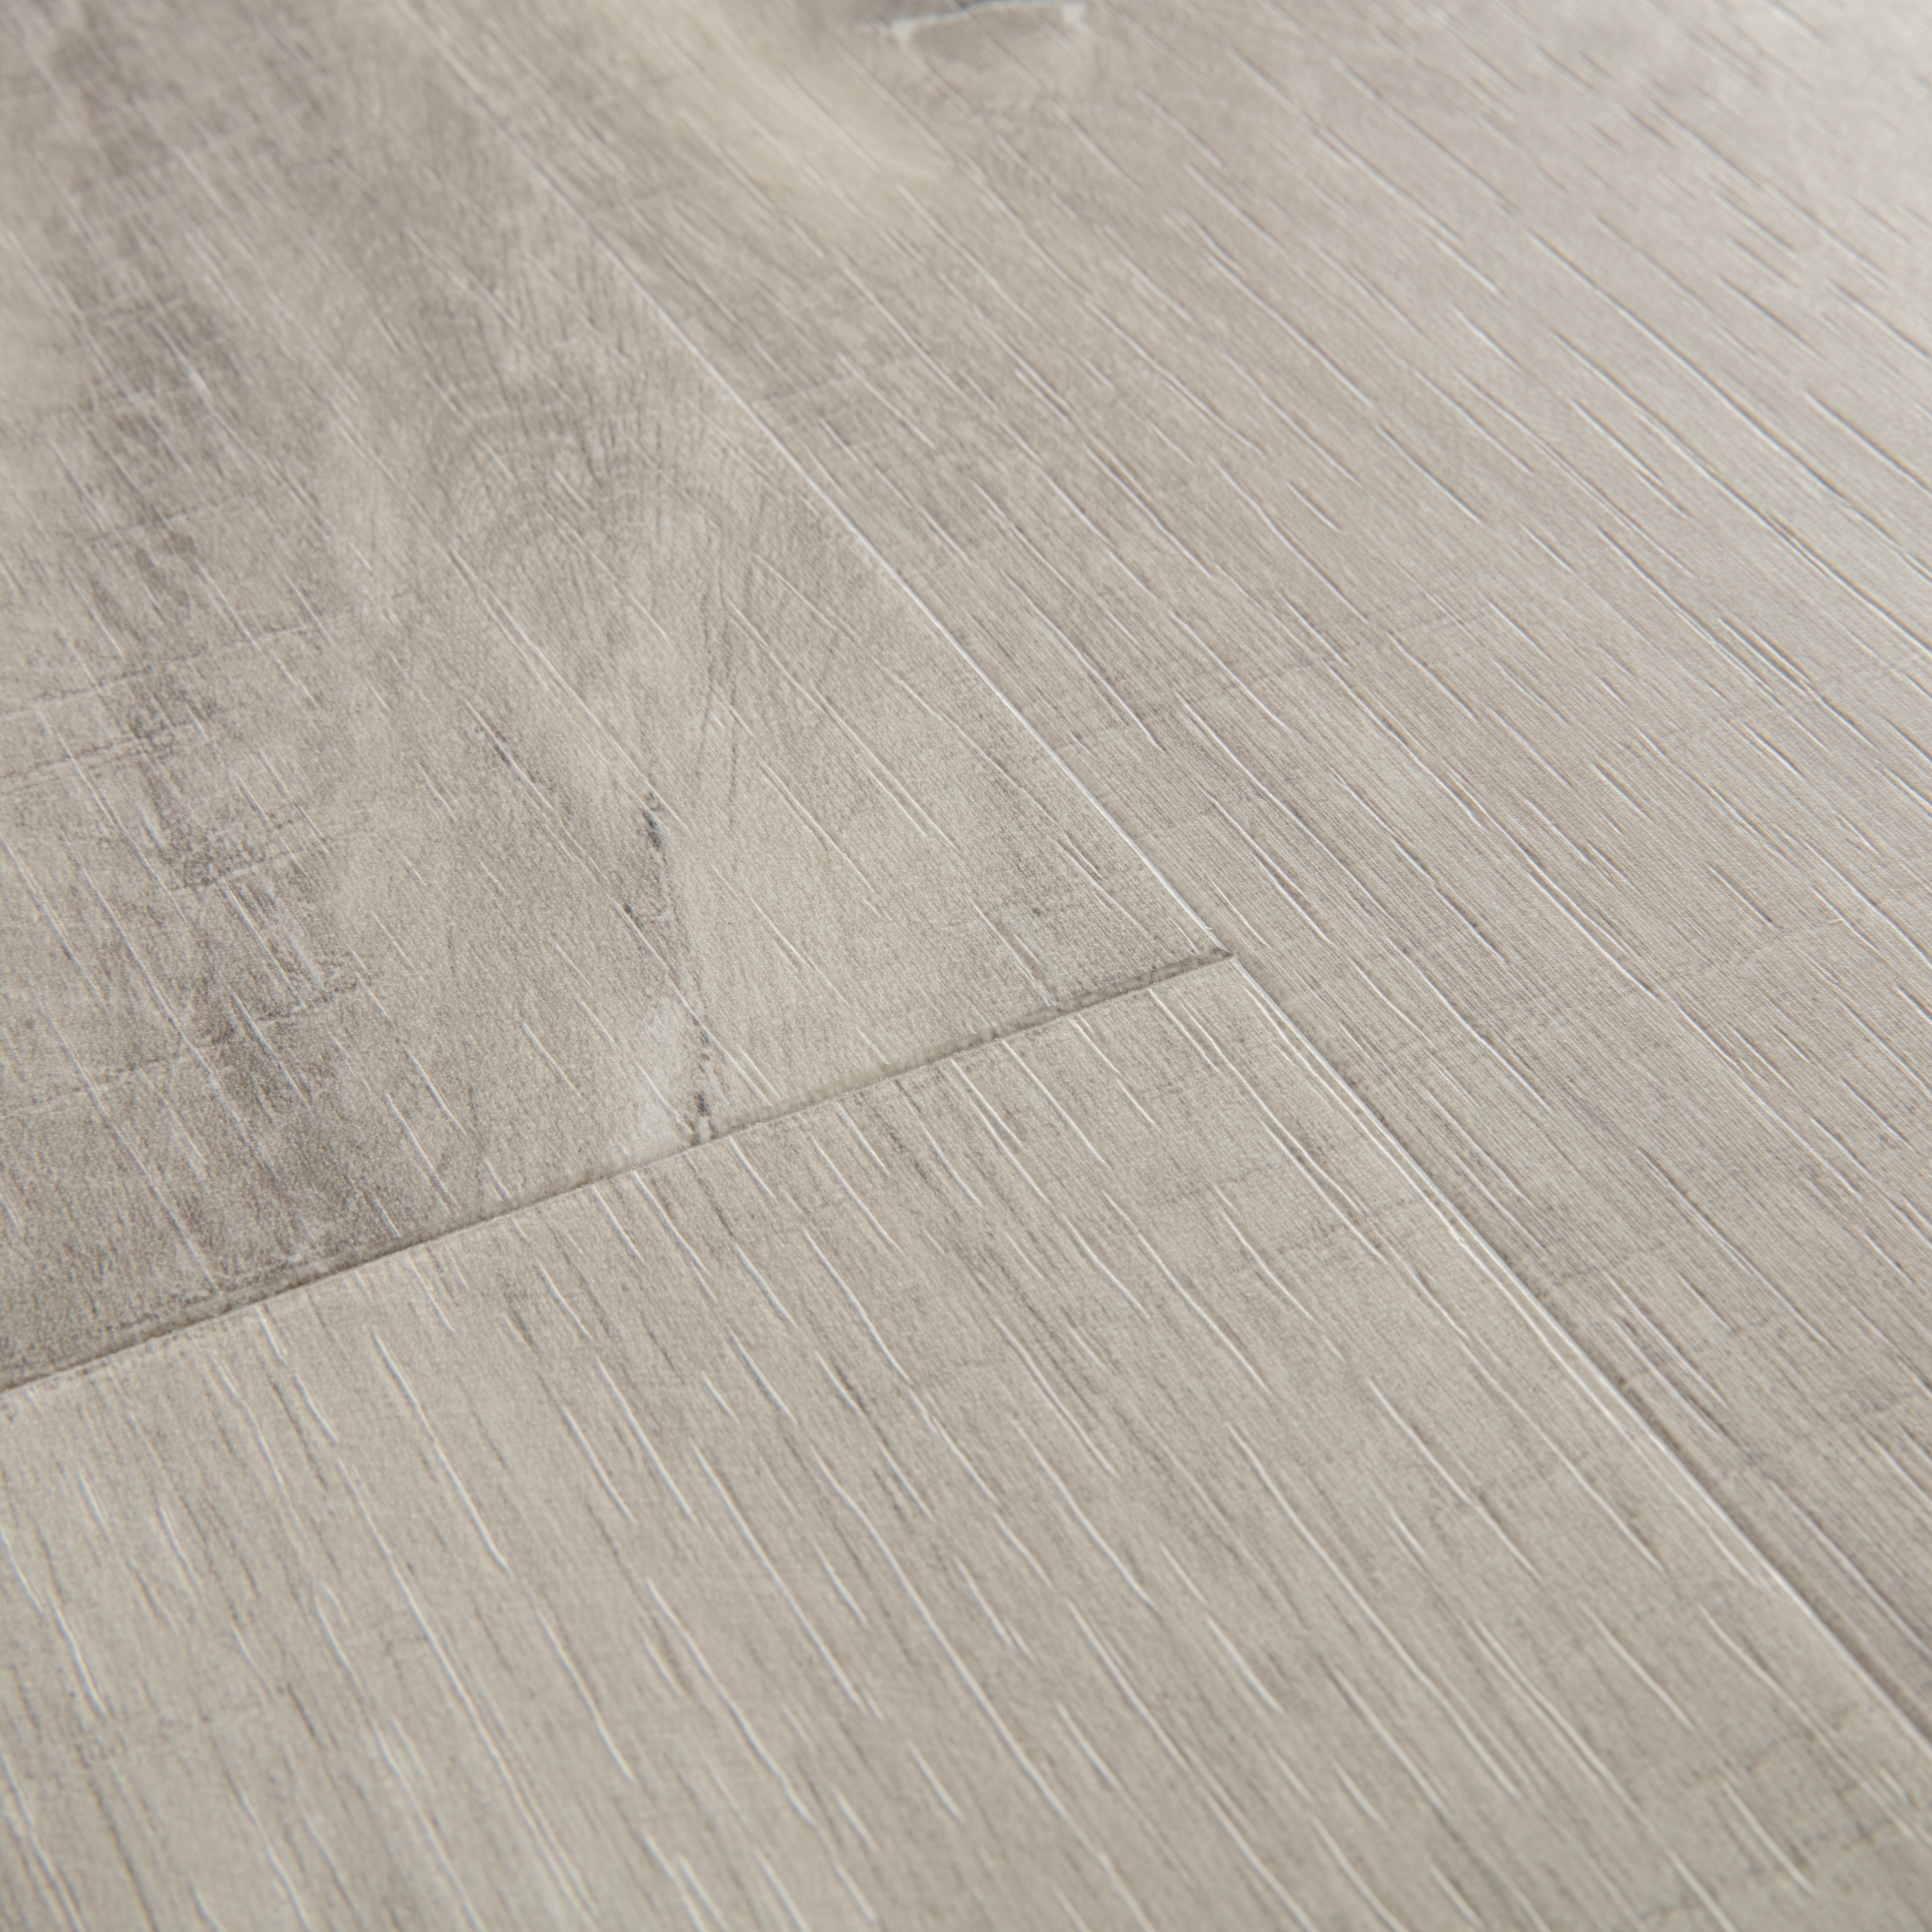 Quick-Step Magnifico Canyon Grey Oak with Sawcuts Rigid Luxury Vinyl Flooring with Integrated Underlay - 2.128m2